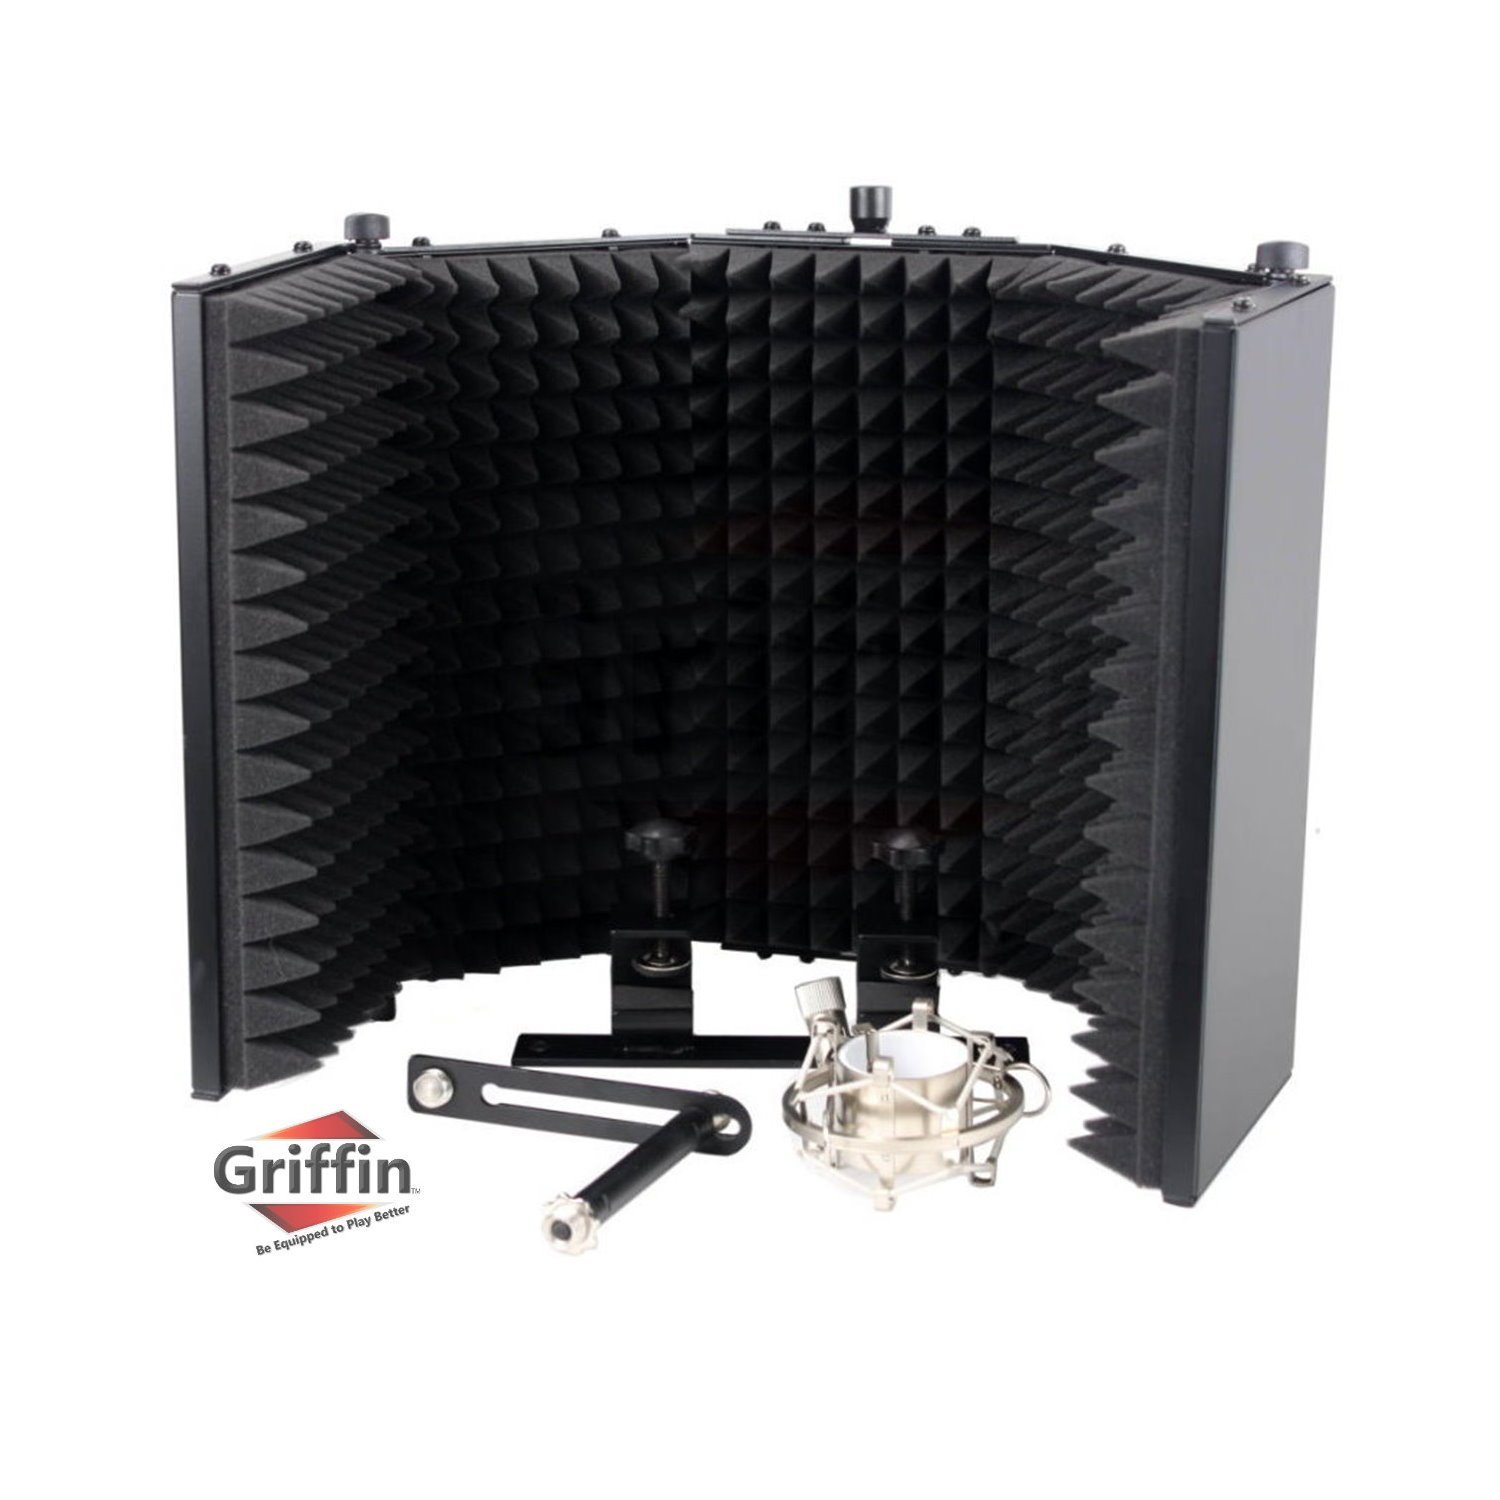 Studio Microphone Soundproofing Acoustic Foam Panel by GRIFFIN - Soundproof Filt